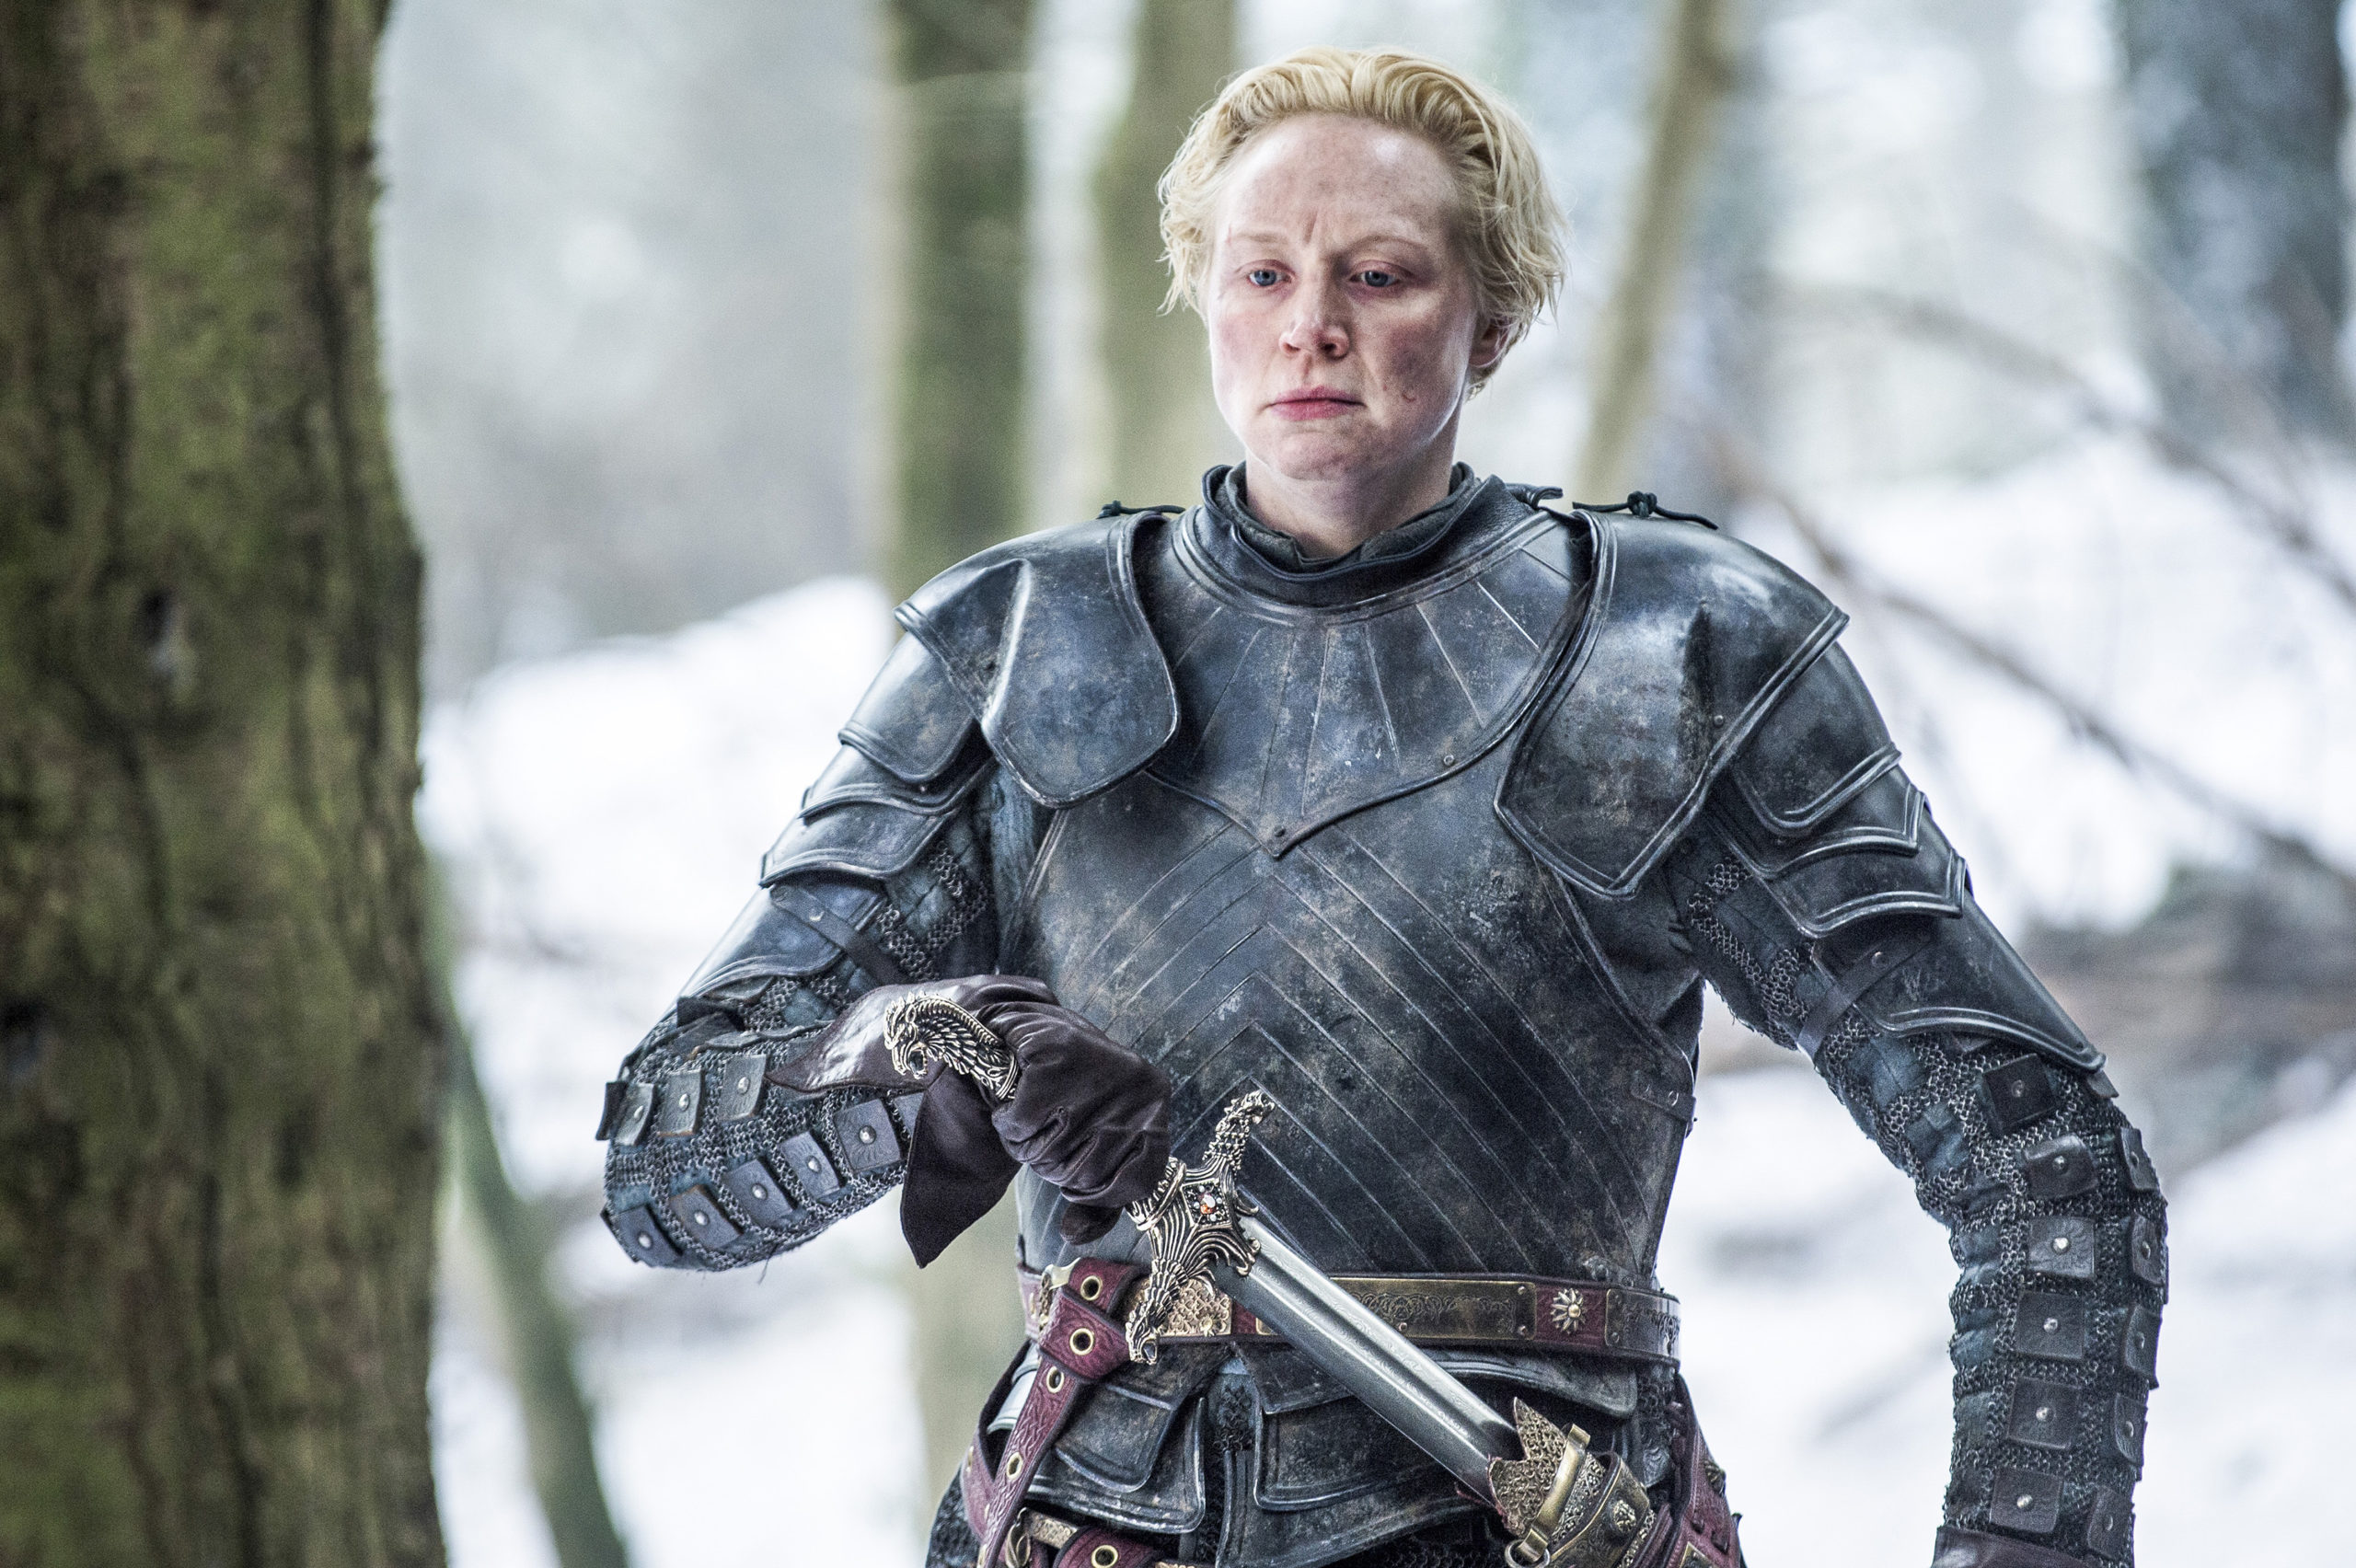 Game of Thrones - Brienne of Tarth